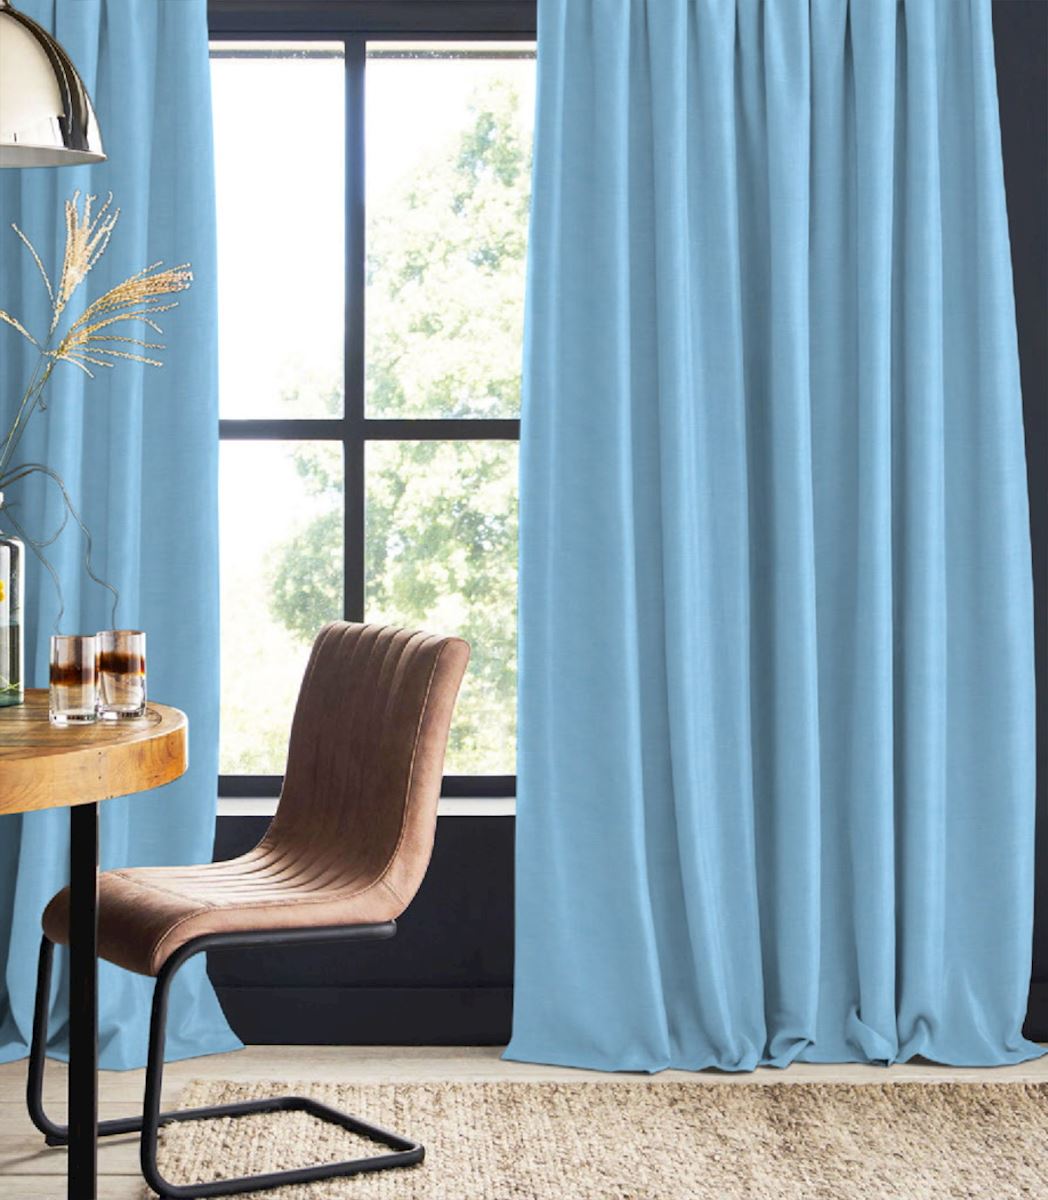 Night curtain turquoise blue Cal